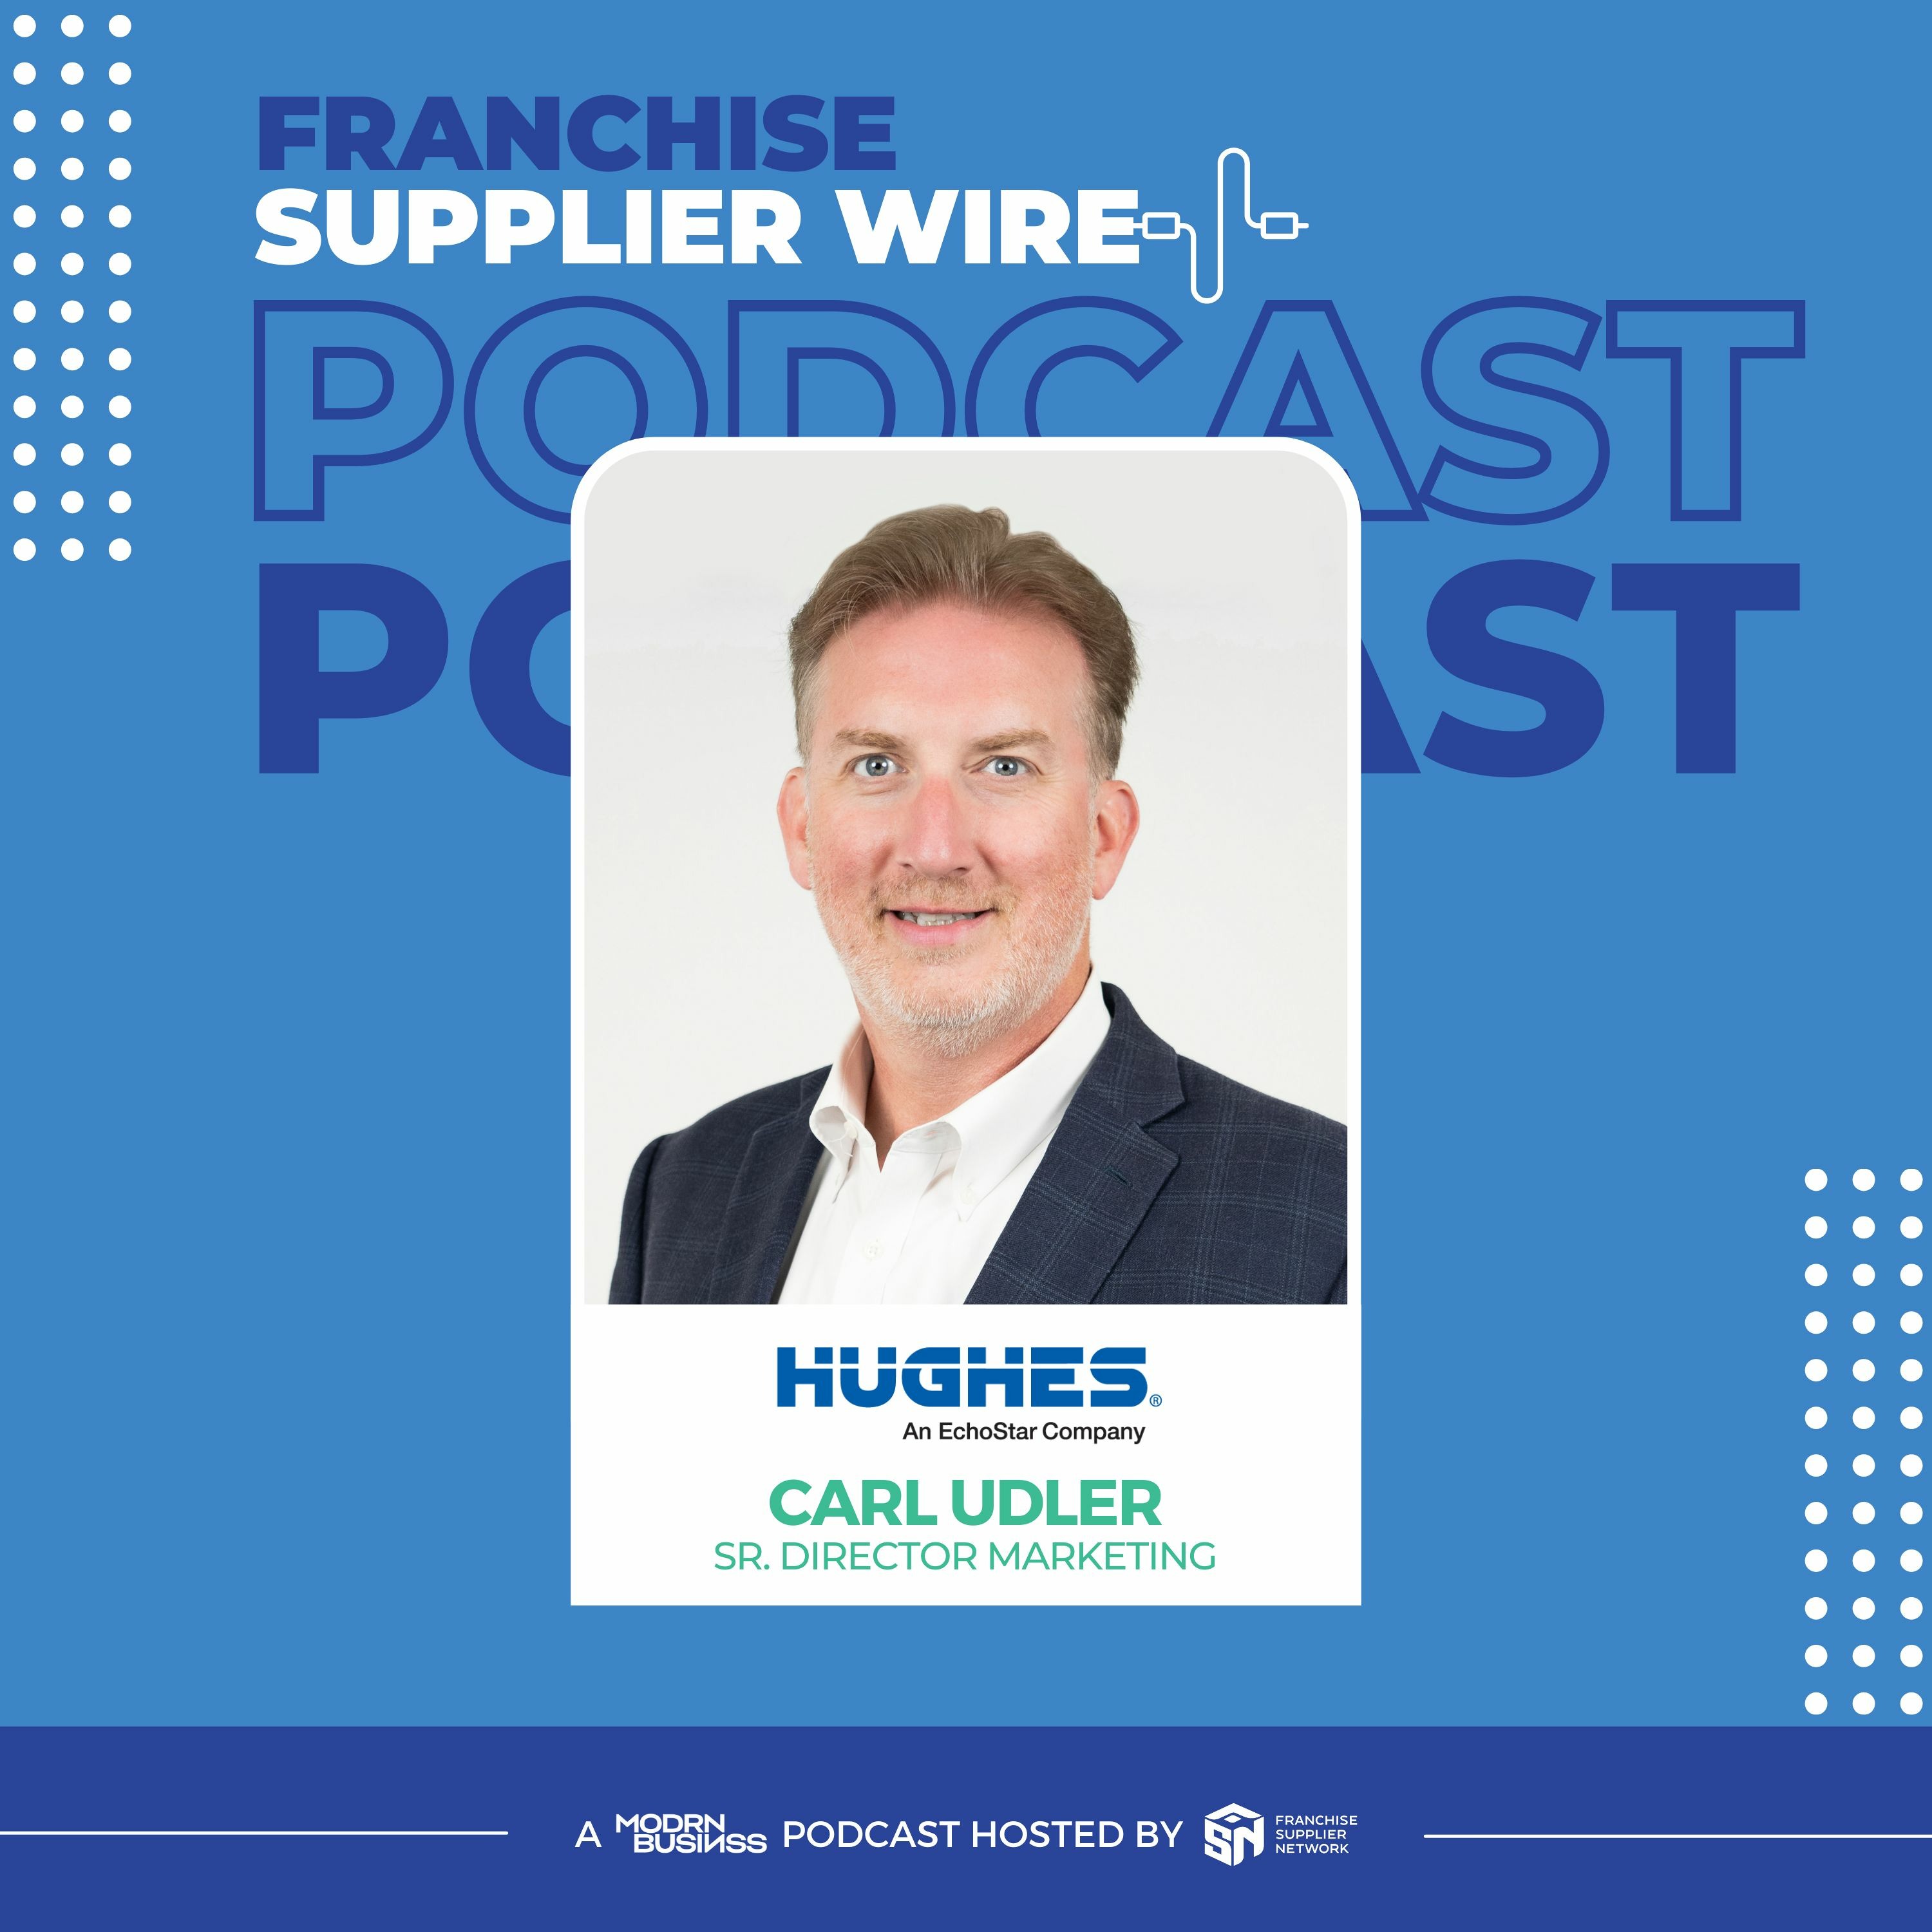 Supplier Wire 027: Cyber Security and How to Make Franchisees Profitable with Carl Udler from Hughes